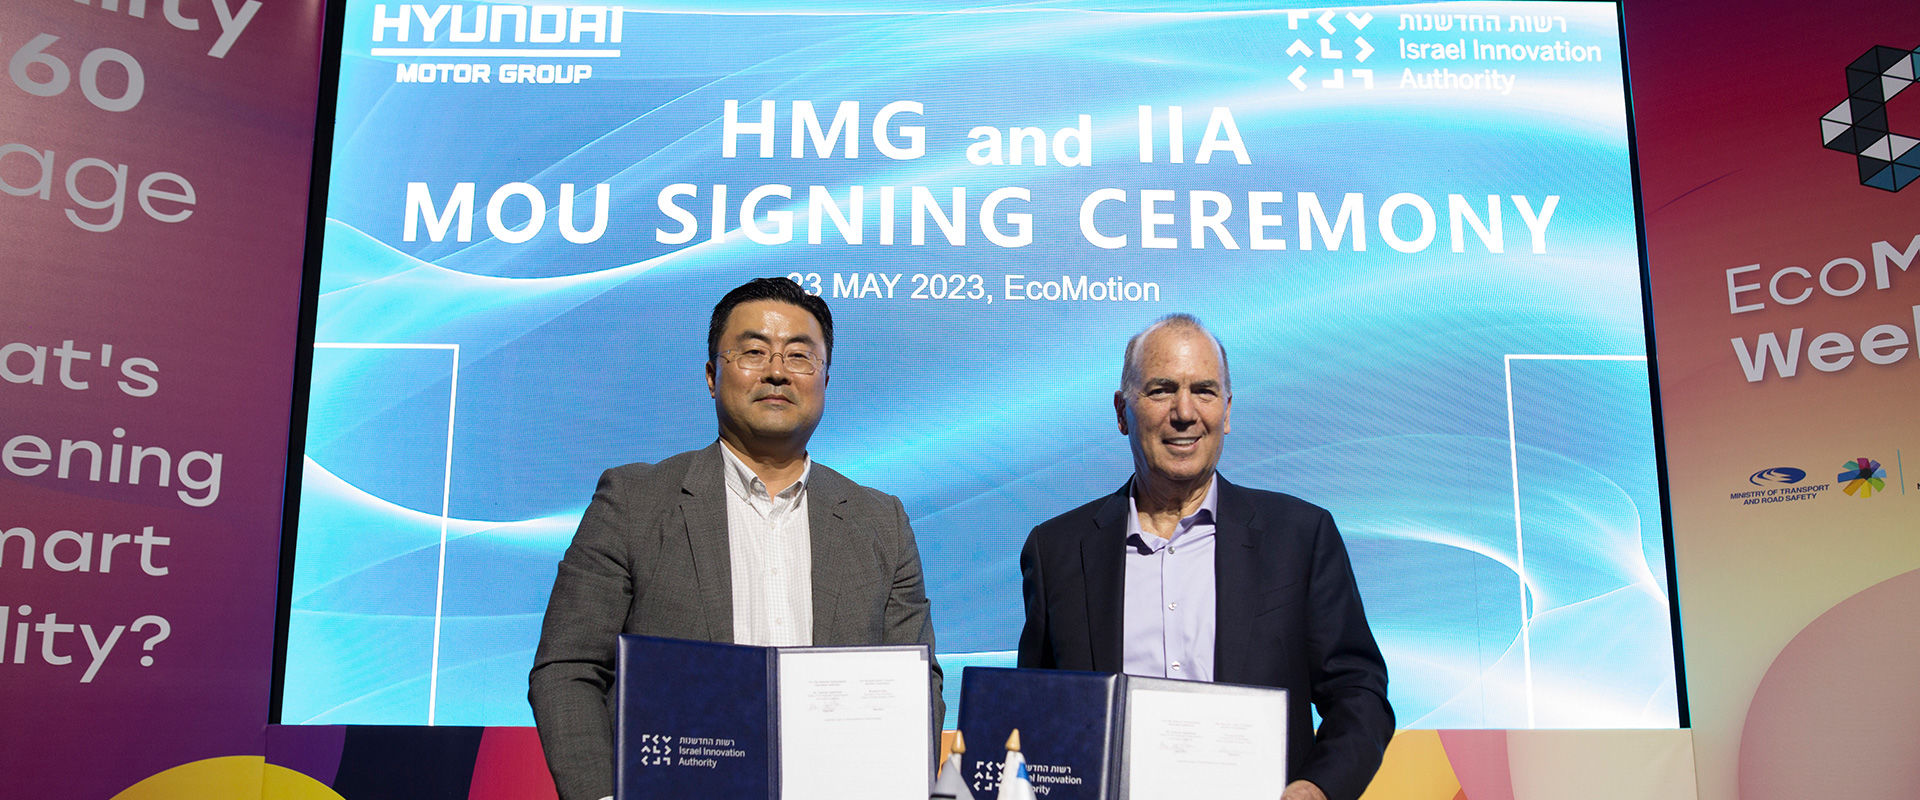 Hyundai Motor Group (the Group) this week signed a memorandum of understanding (MoU) for a strategic partnership with the Israel Innovation Authority at EcoMotion Week 2023 in Tel Aviv. At the 11th annual event, Heung-soo Kim, Executive Vice President and Head of the Global Strategy Office (GSO), delivered a keynote speech on ‘Hyundai Innovation in Israel.’